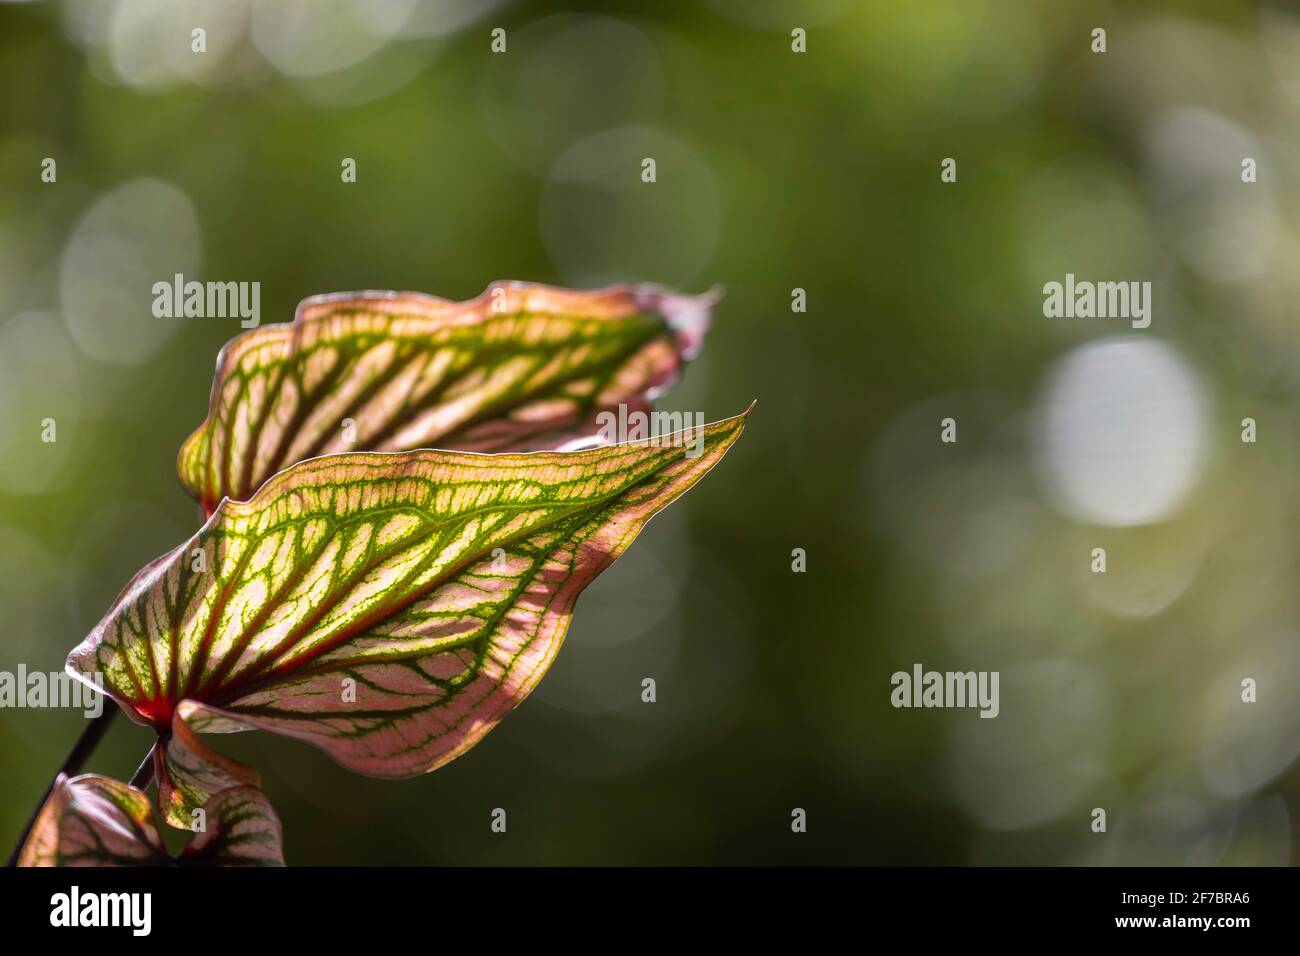 The leaves of the caladium, an ornamental plant with a beautiful leaf pattern in the morning atmosphere. Stock Photo